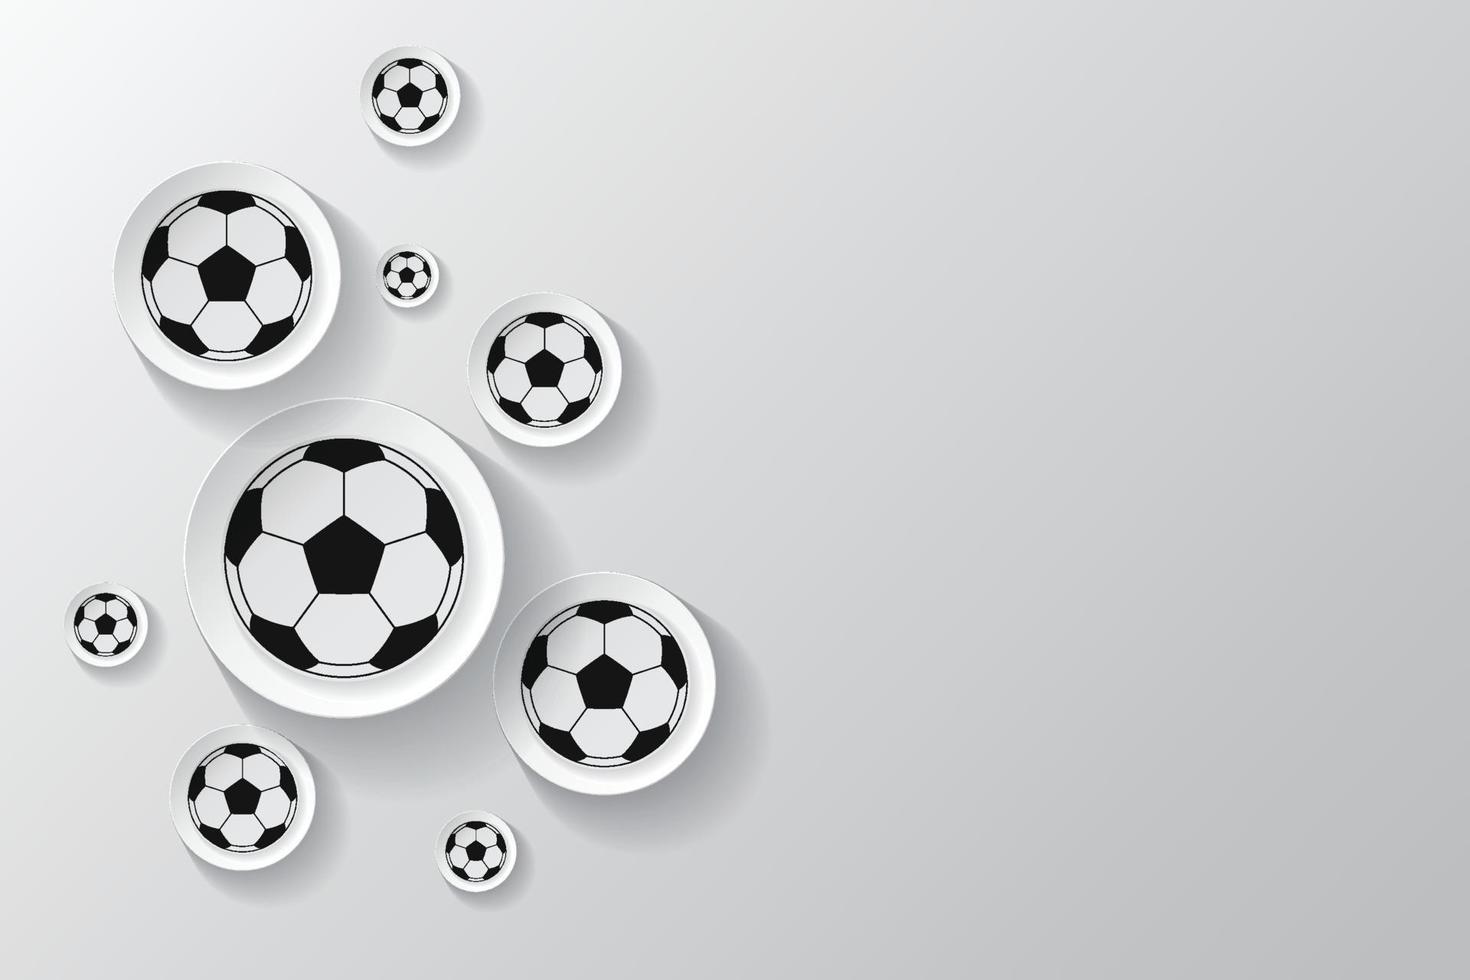 Soccer ball with soccer field pattern background vector